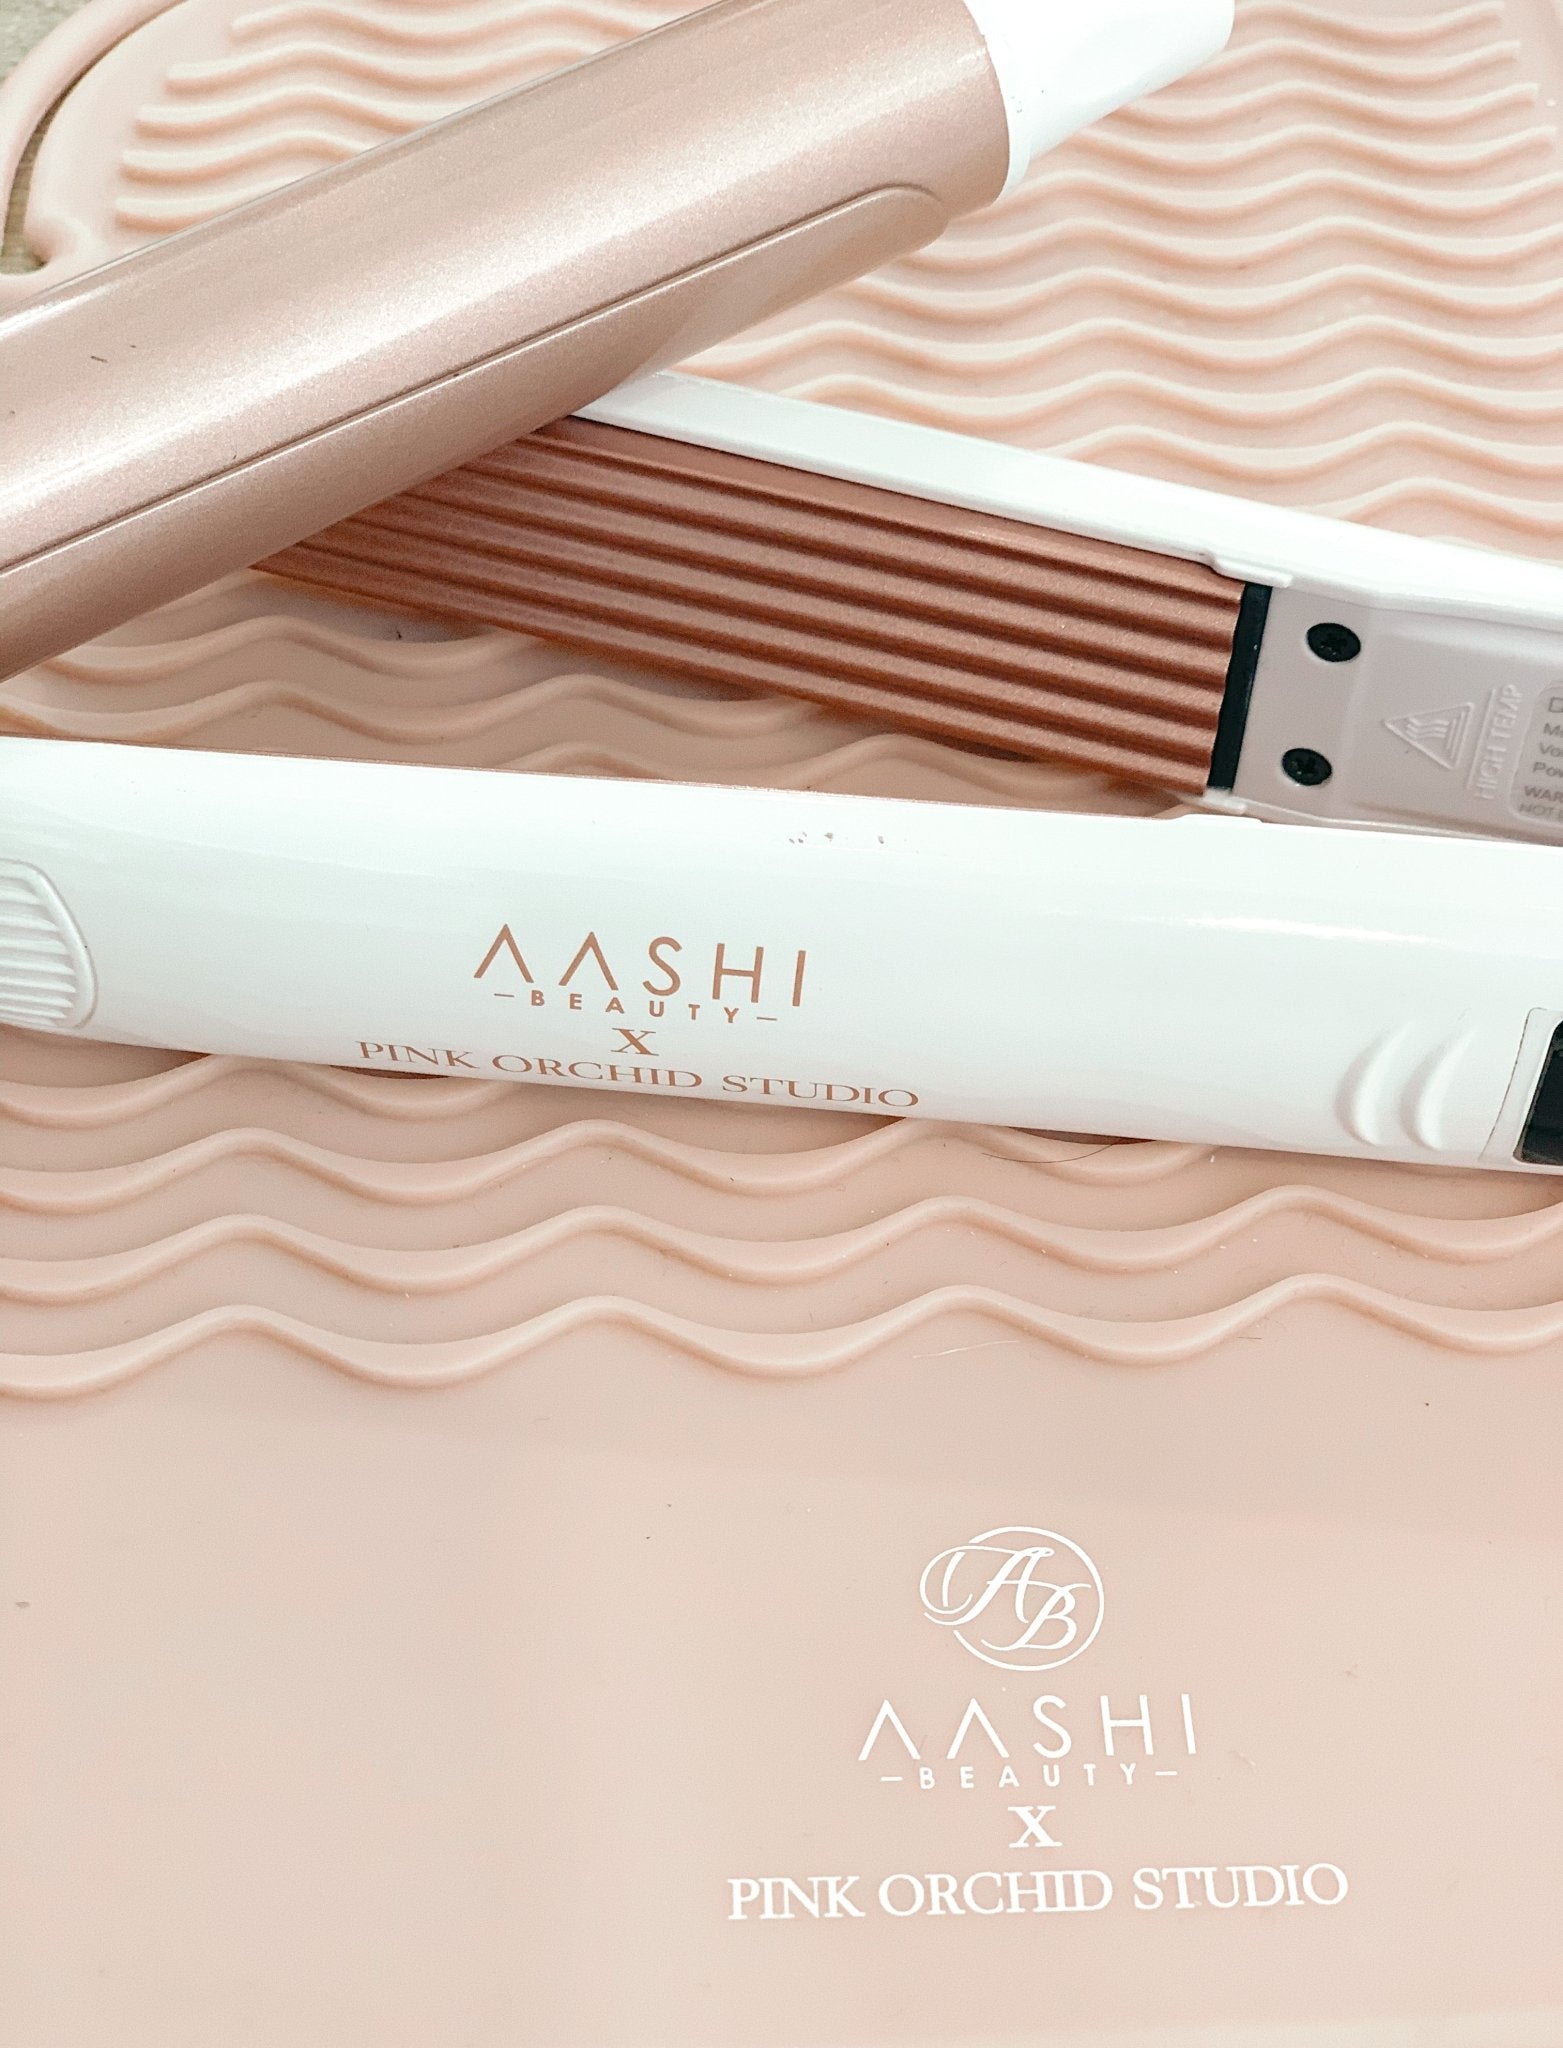 Professional Combo Deal (25mm) 3-in-1 Curling Revolver & 1" Professional Hair Crimper - Aashi Beauty